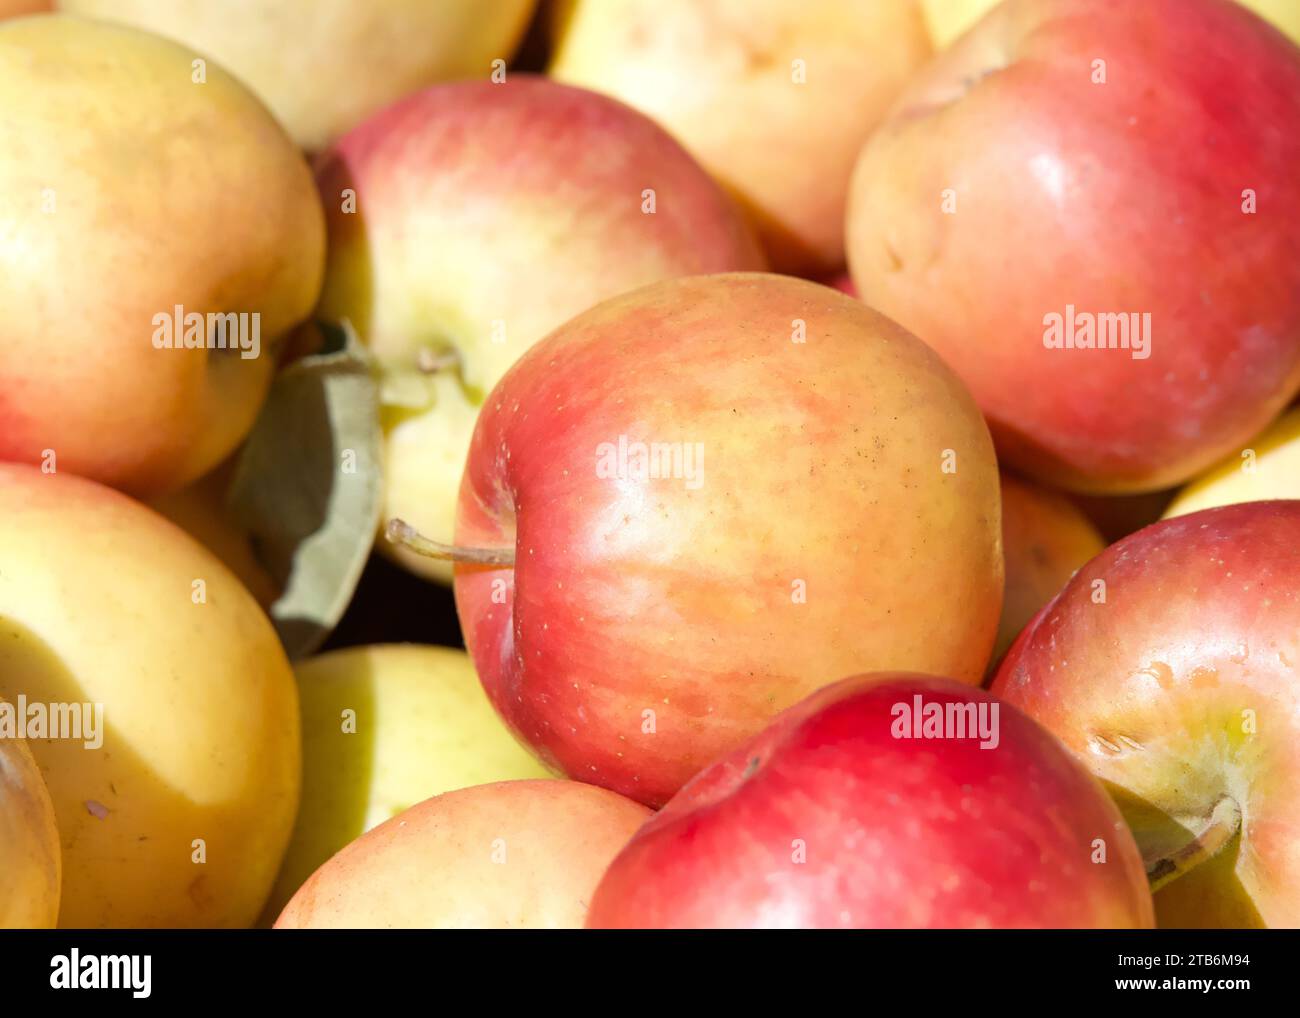 https://c8.alamy.com/comp/2TB6M94/close-up-on-pile-of-freshly-picked-red-fuji-apples-for-sale-at-farmers-market-2TB6M94.jpg